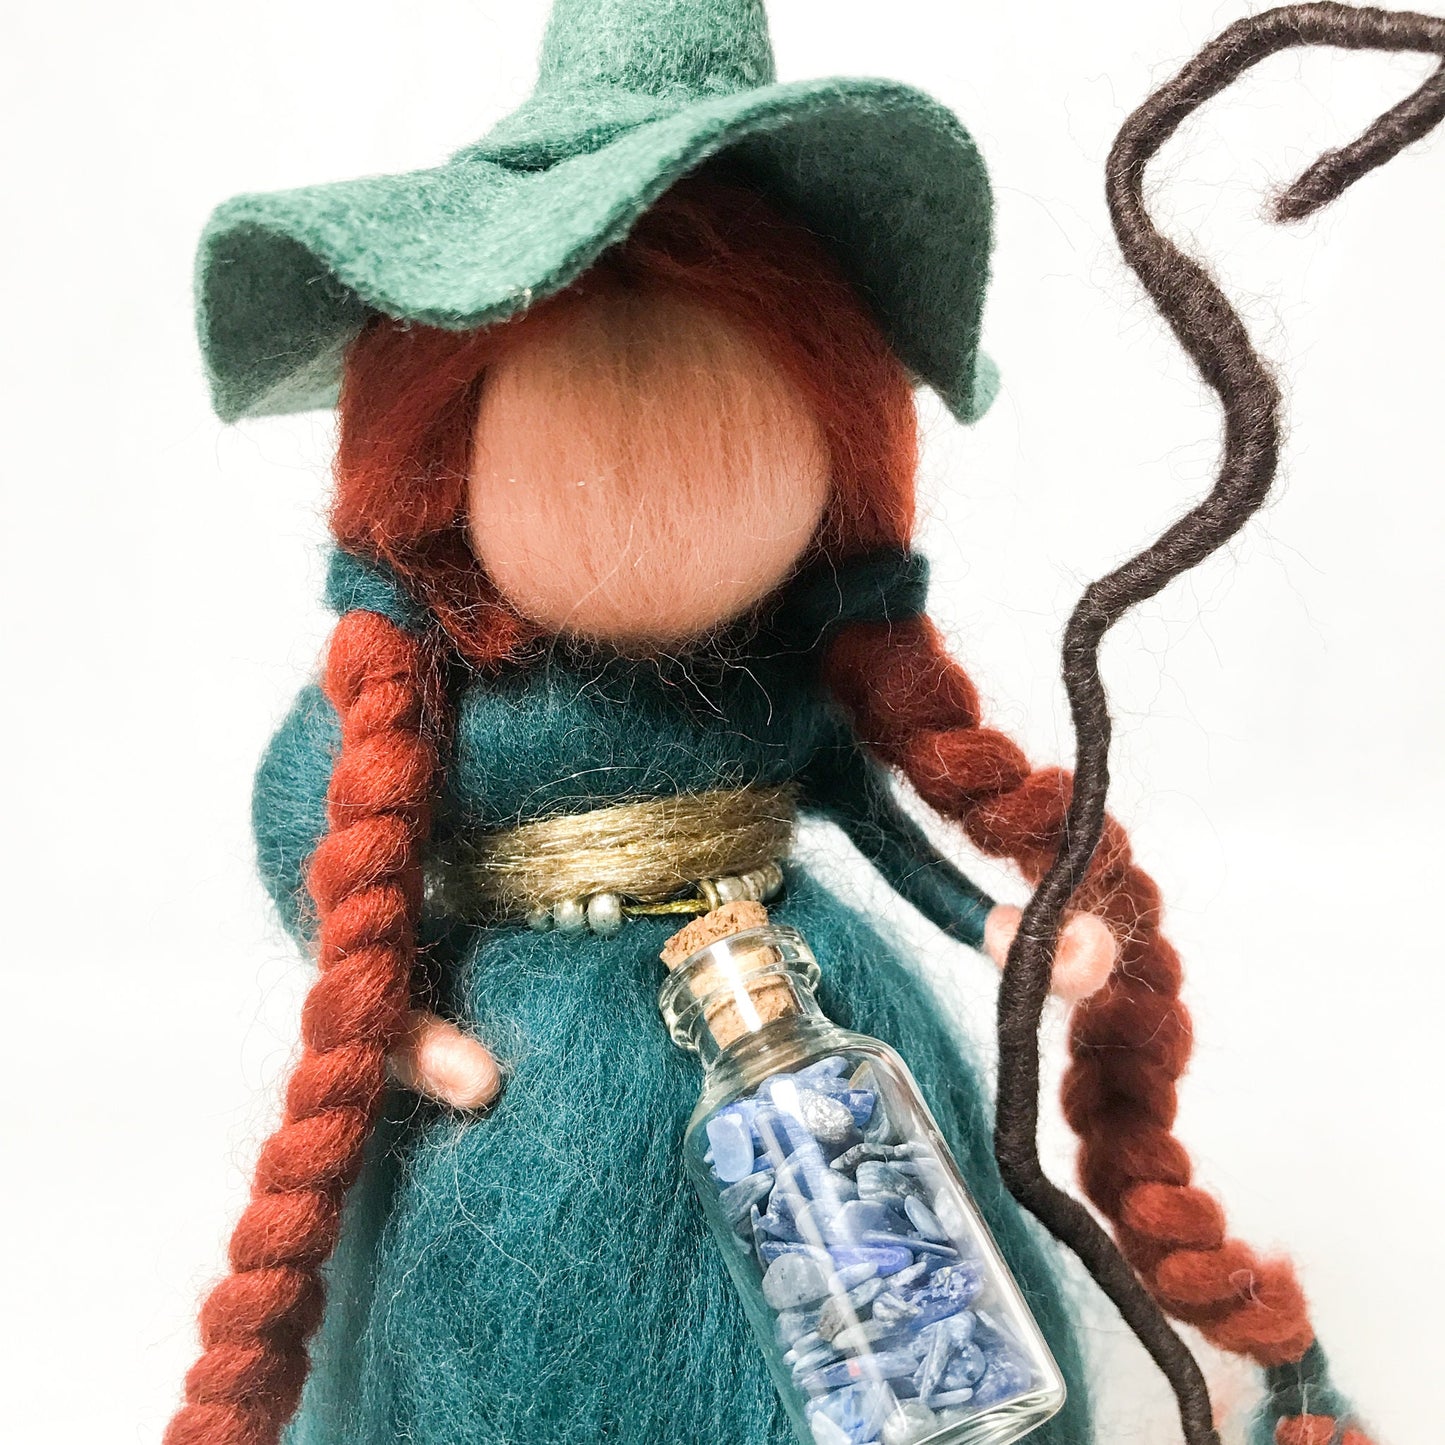 Green Witch. Wise Forest witch with quartz mix bottle and fire broom.